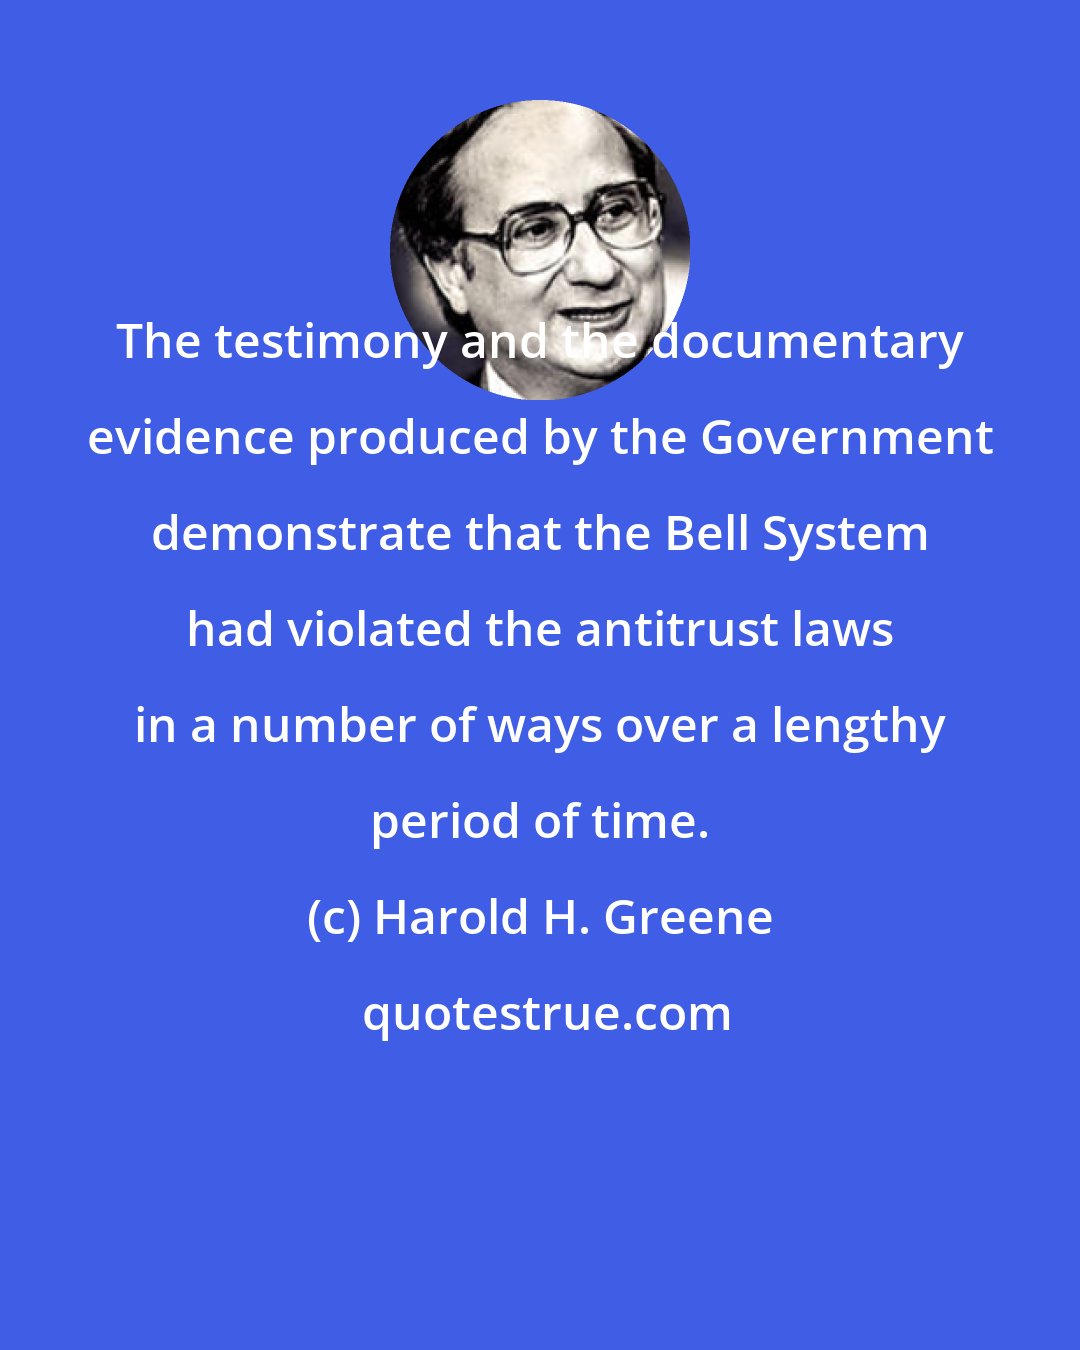 Harold H. Greene: The testimony and the documentary evidence produced by the Government demonstrate that the Bell System had violated the antitrust laws in a number of ways over a lengthy period of time.